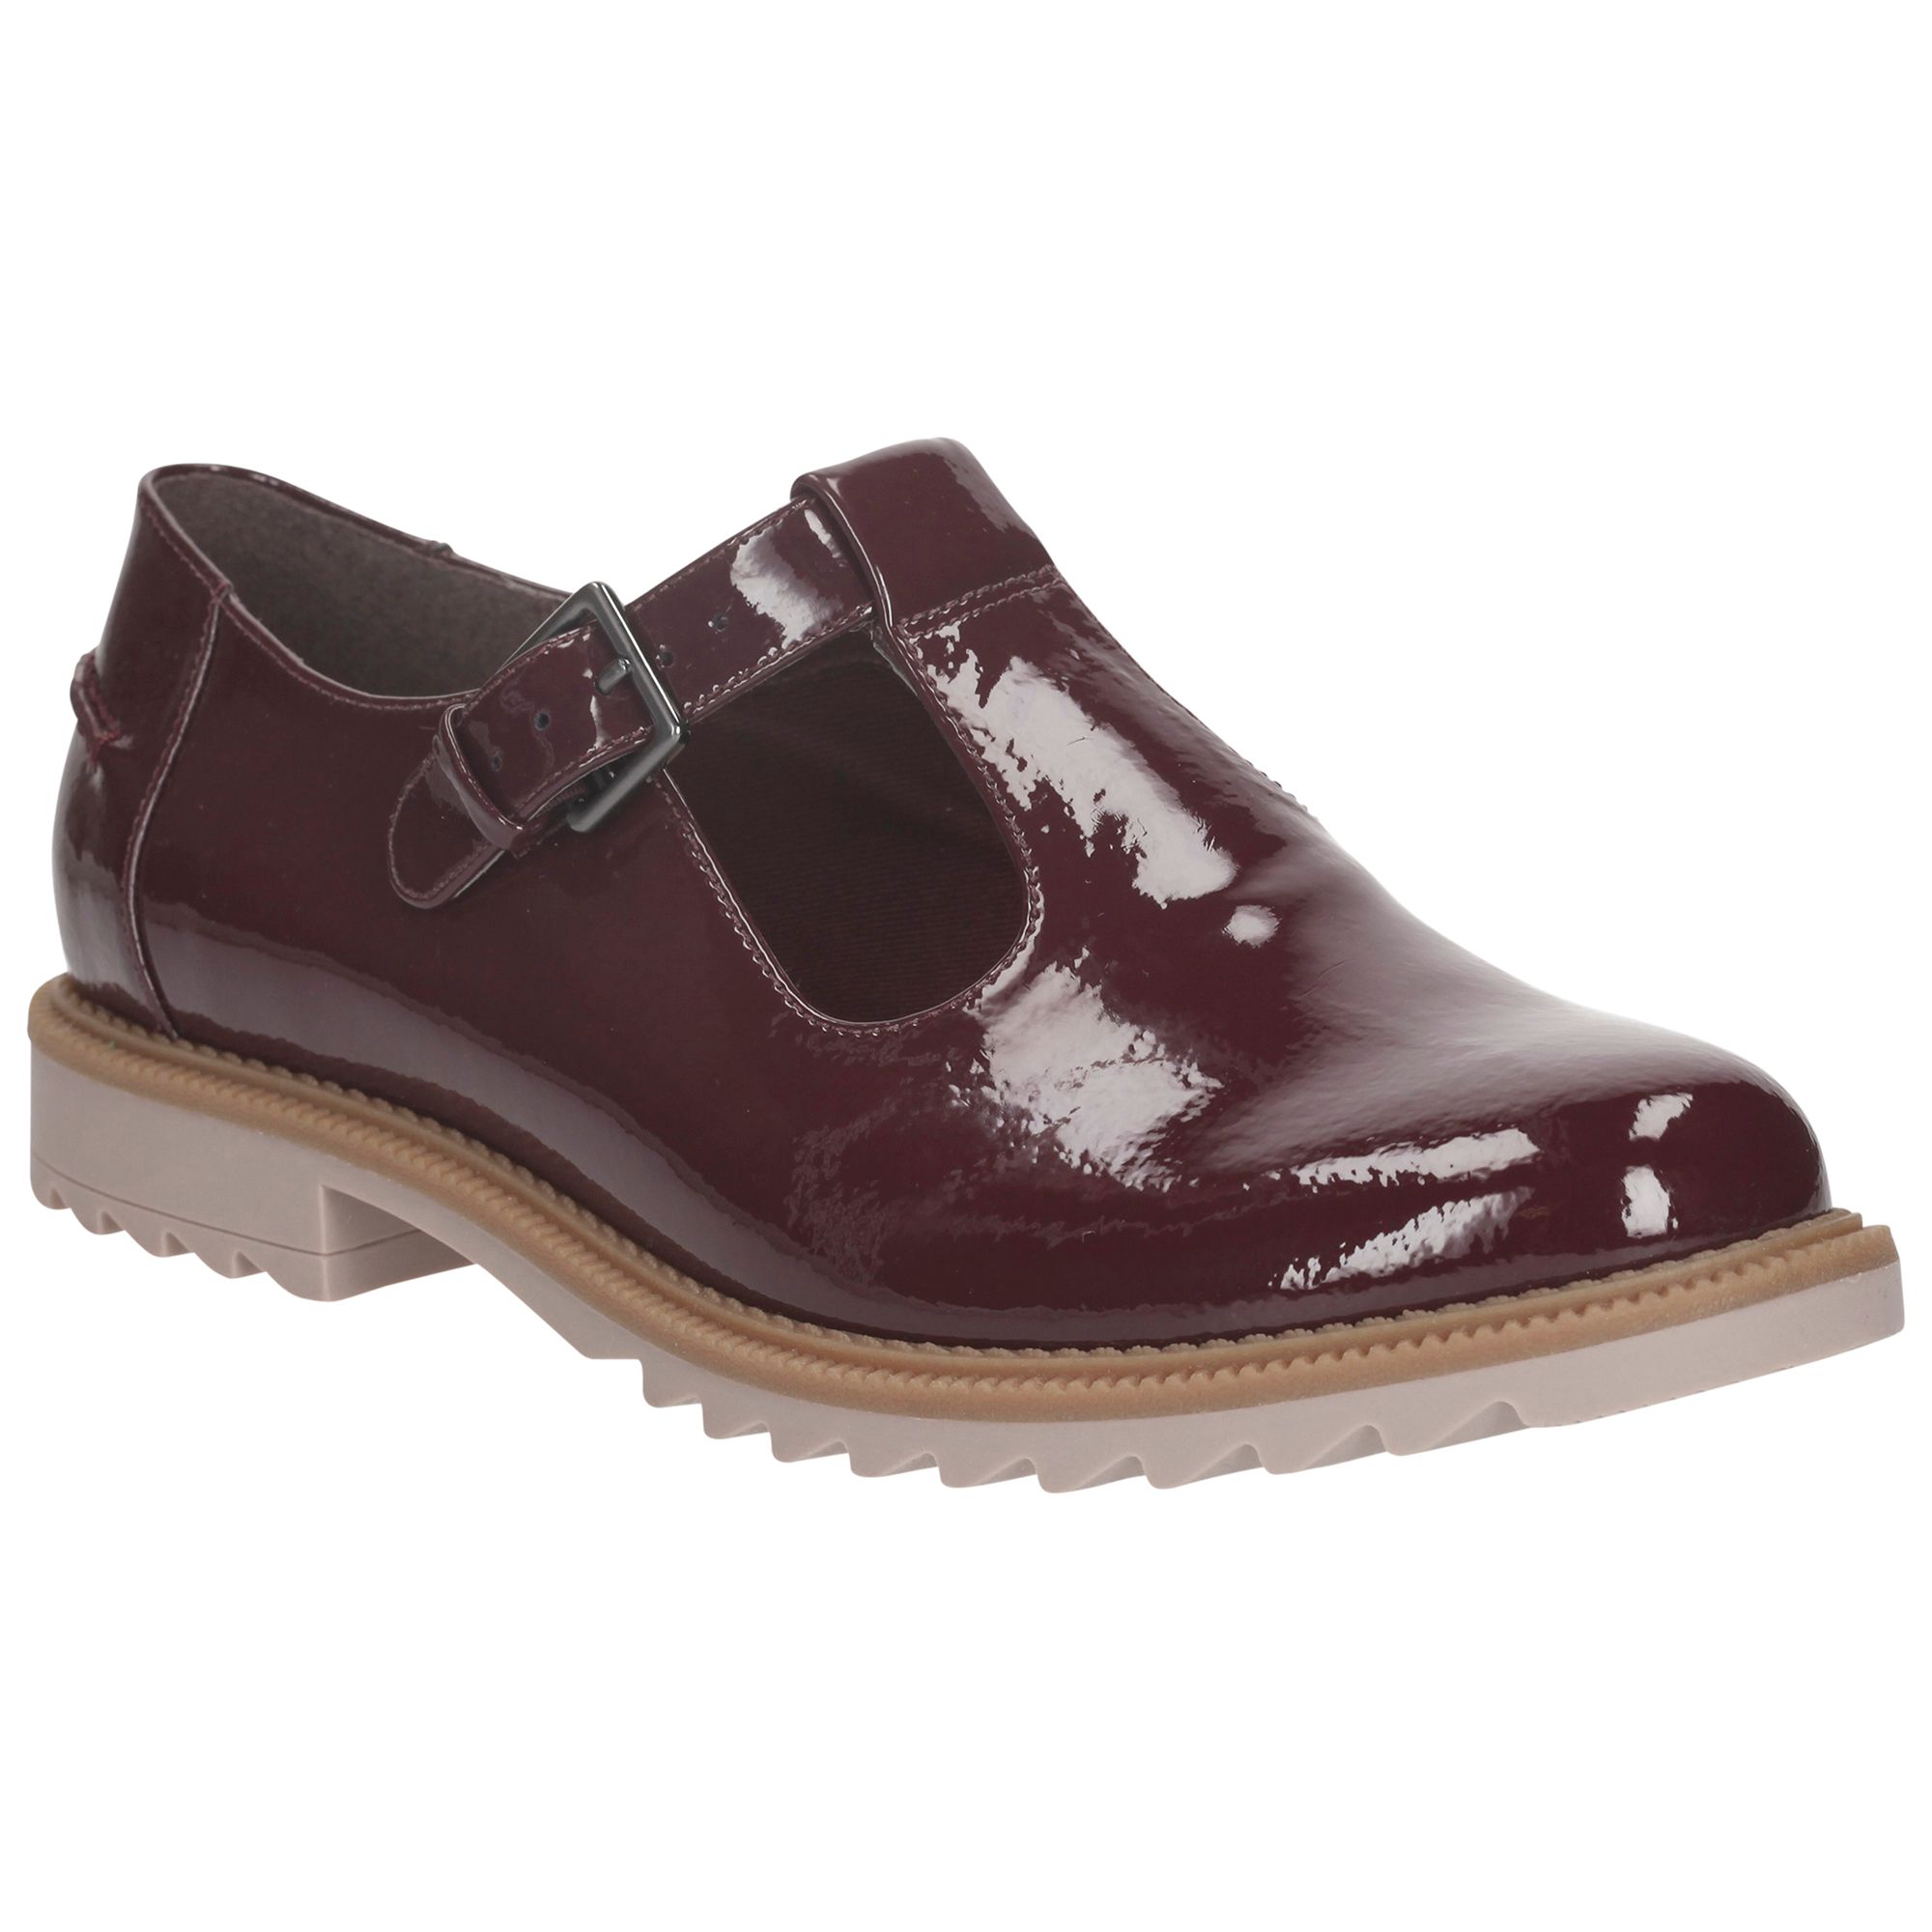 clarks burgundy patent shoes